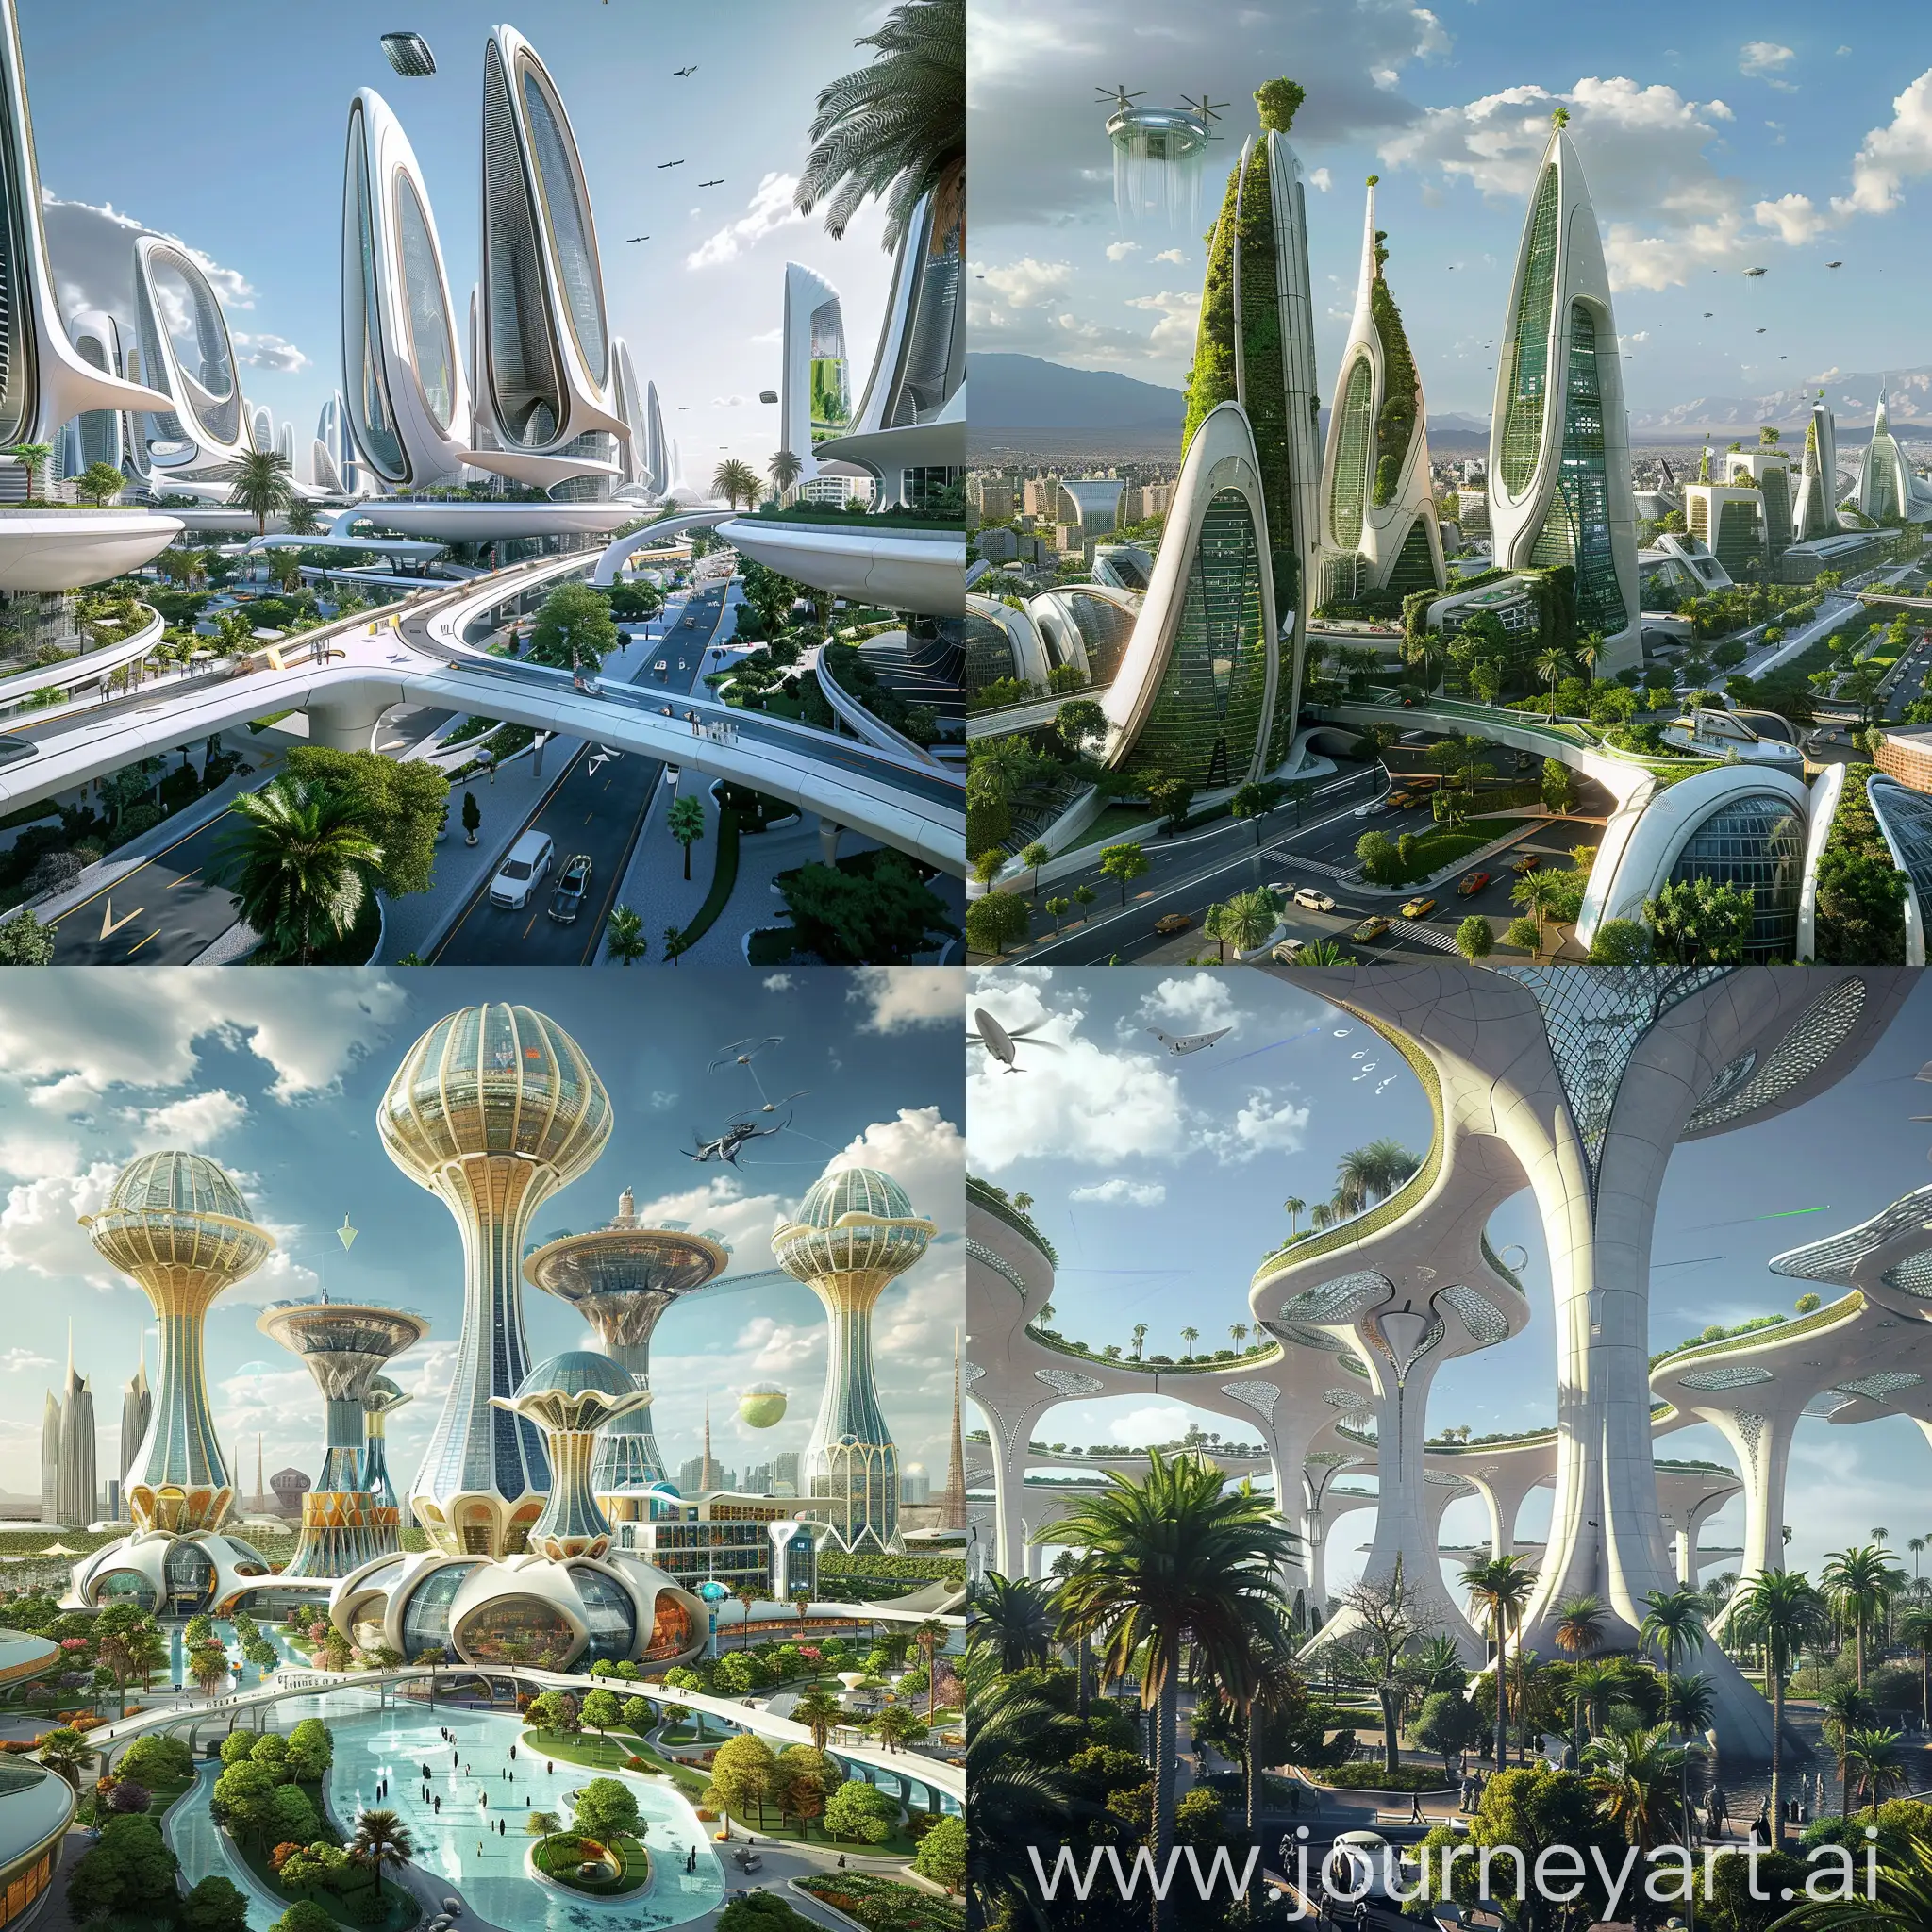 Futuristic Baghdad, Smart Grids, Autonomous Transportation Hubs, Advanced Water Purification Systems, Vertical Farms, Waste-to-Energy Plants, AI-Managed Healthcare Facilities, Responsive Building Materials, Integrated IoT Devices, Cybersecurity Command Centers, Educational Platforms, Self-Repairing Infrastructure, Energy-Generating Public Spaces, Atmospheric Water Generators, Drone Traffic Management Towers, Urban Greenways, Dynamic Facades, Public Service Robots Stations, Eco-Districts, Augmented Reality Zones, Space Elevator Platforms, Futurism, Modern Era, in unreal engine 5 style --stylize 1000